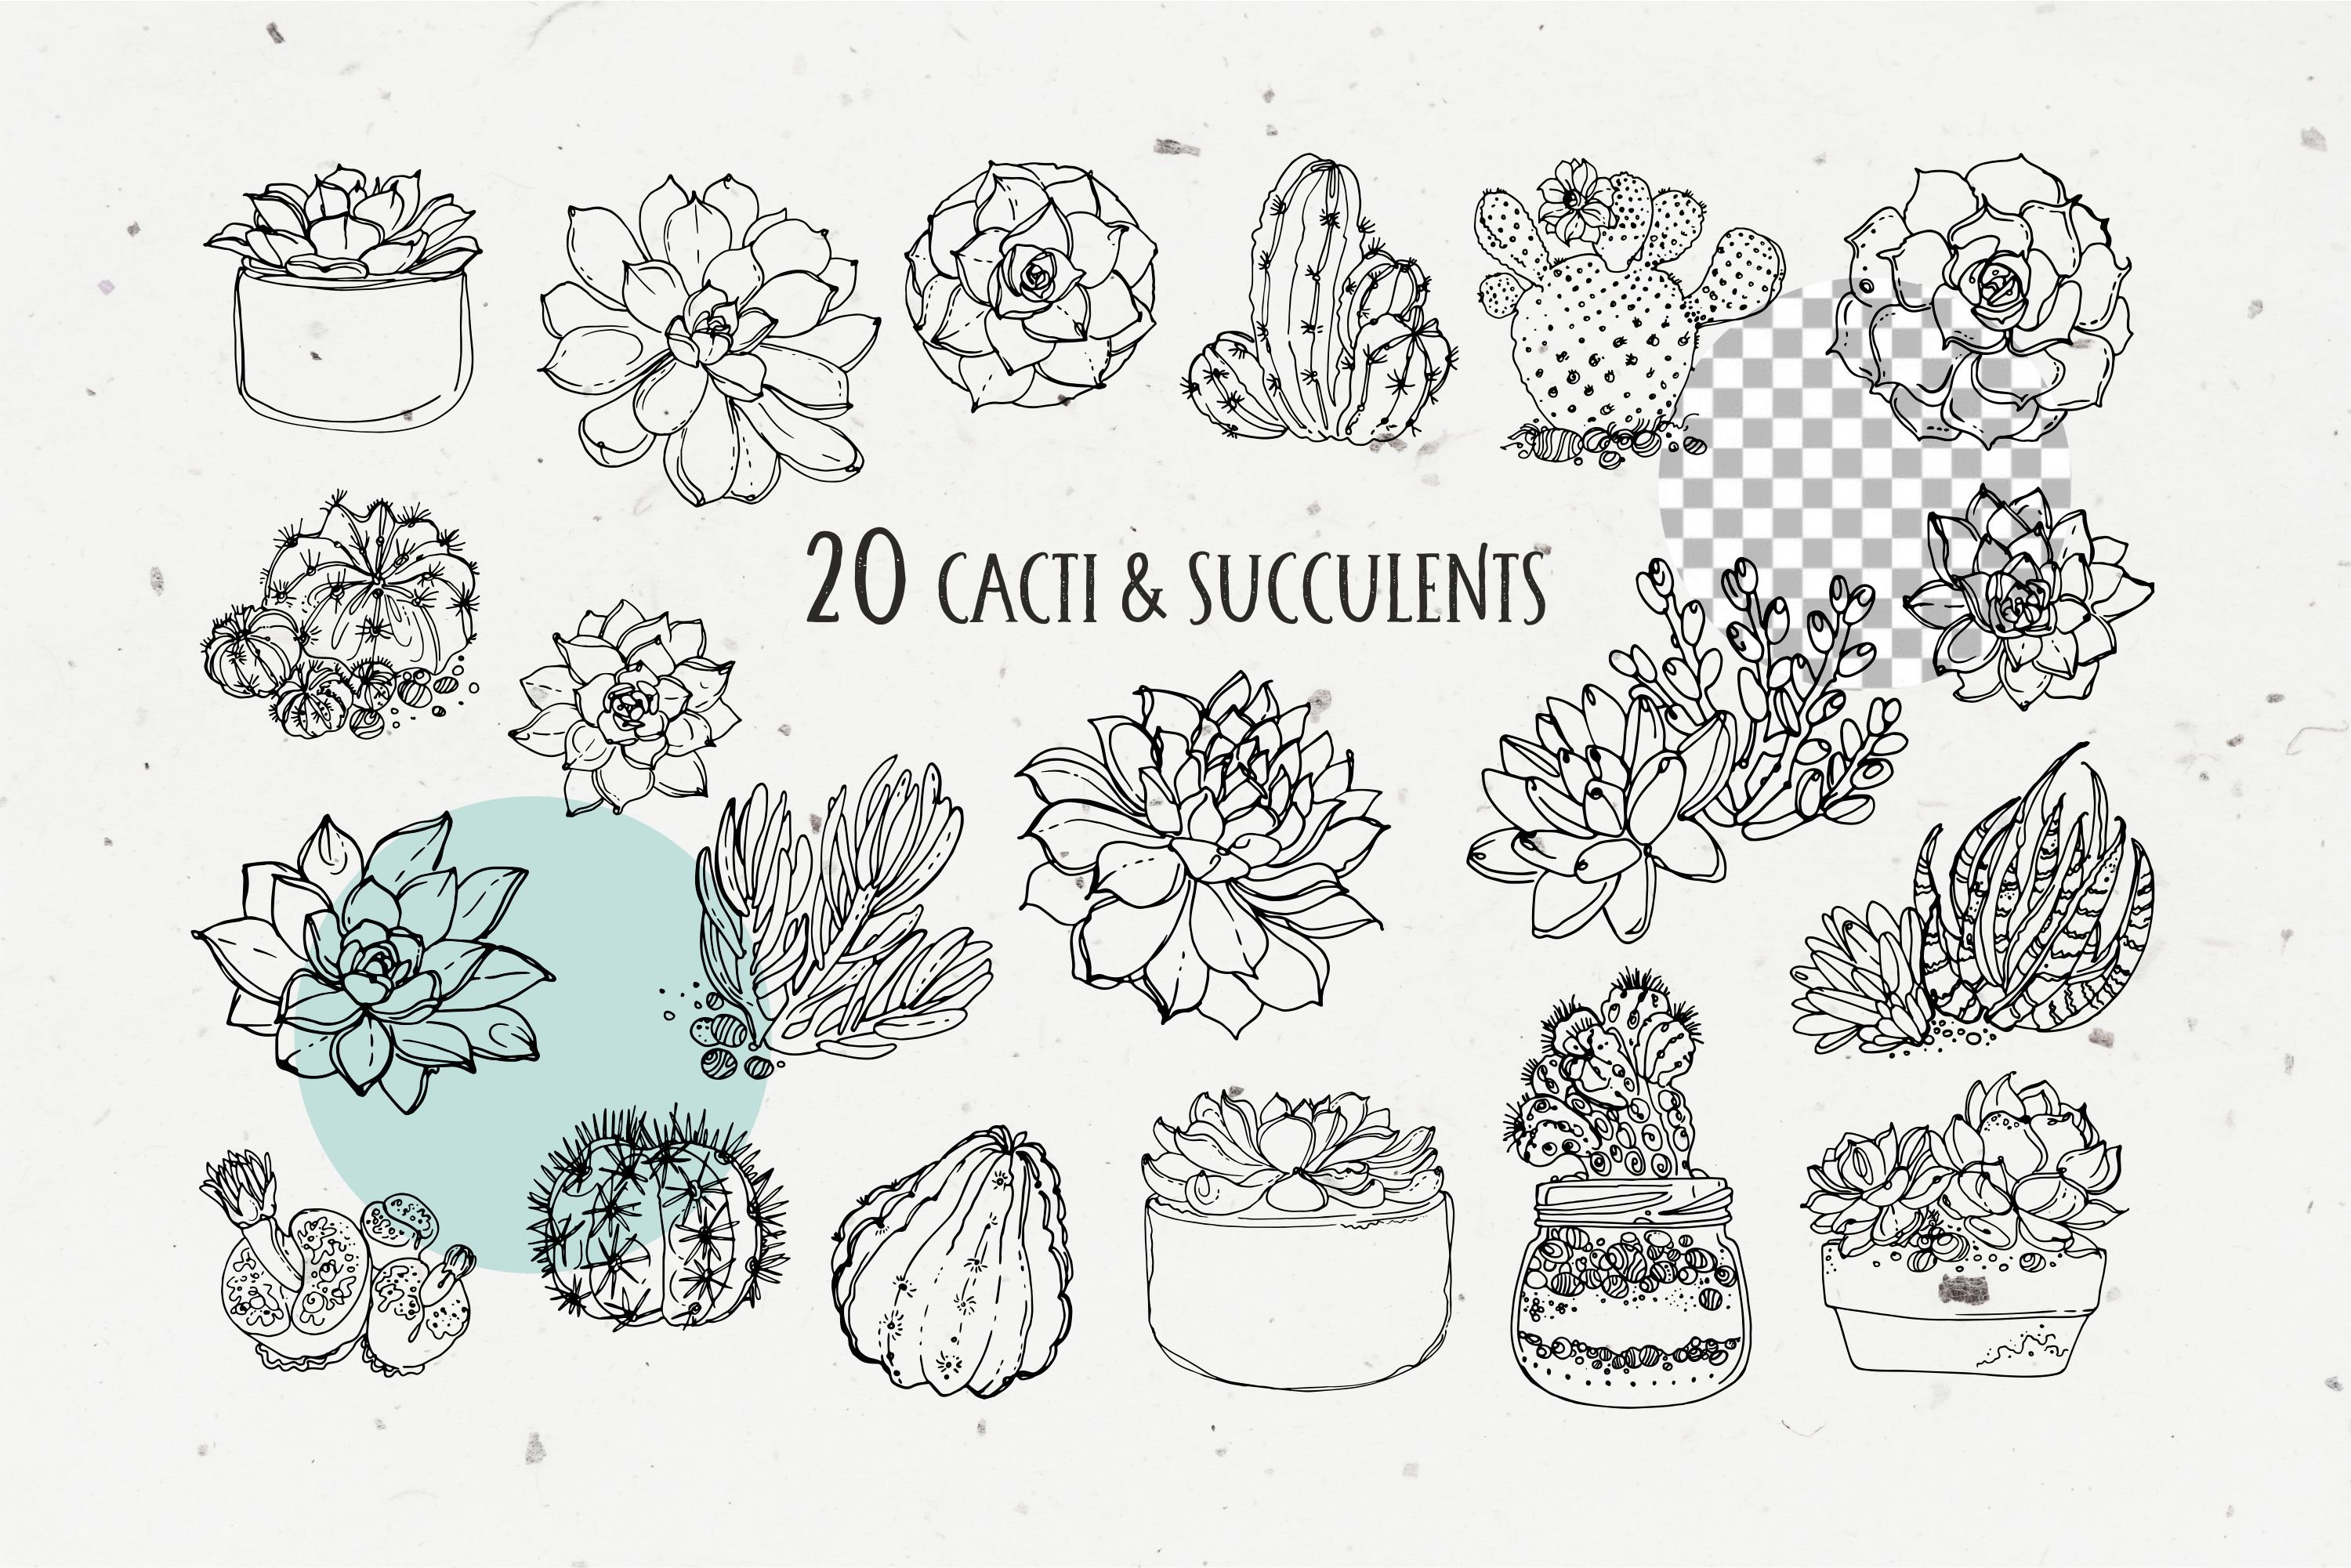 Succulents and cacti preview image.